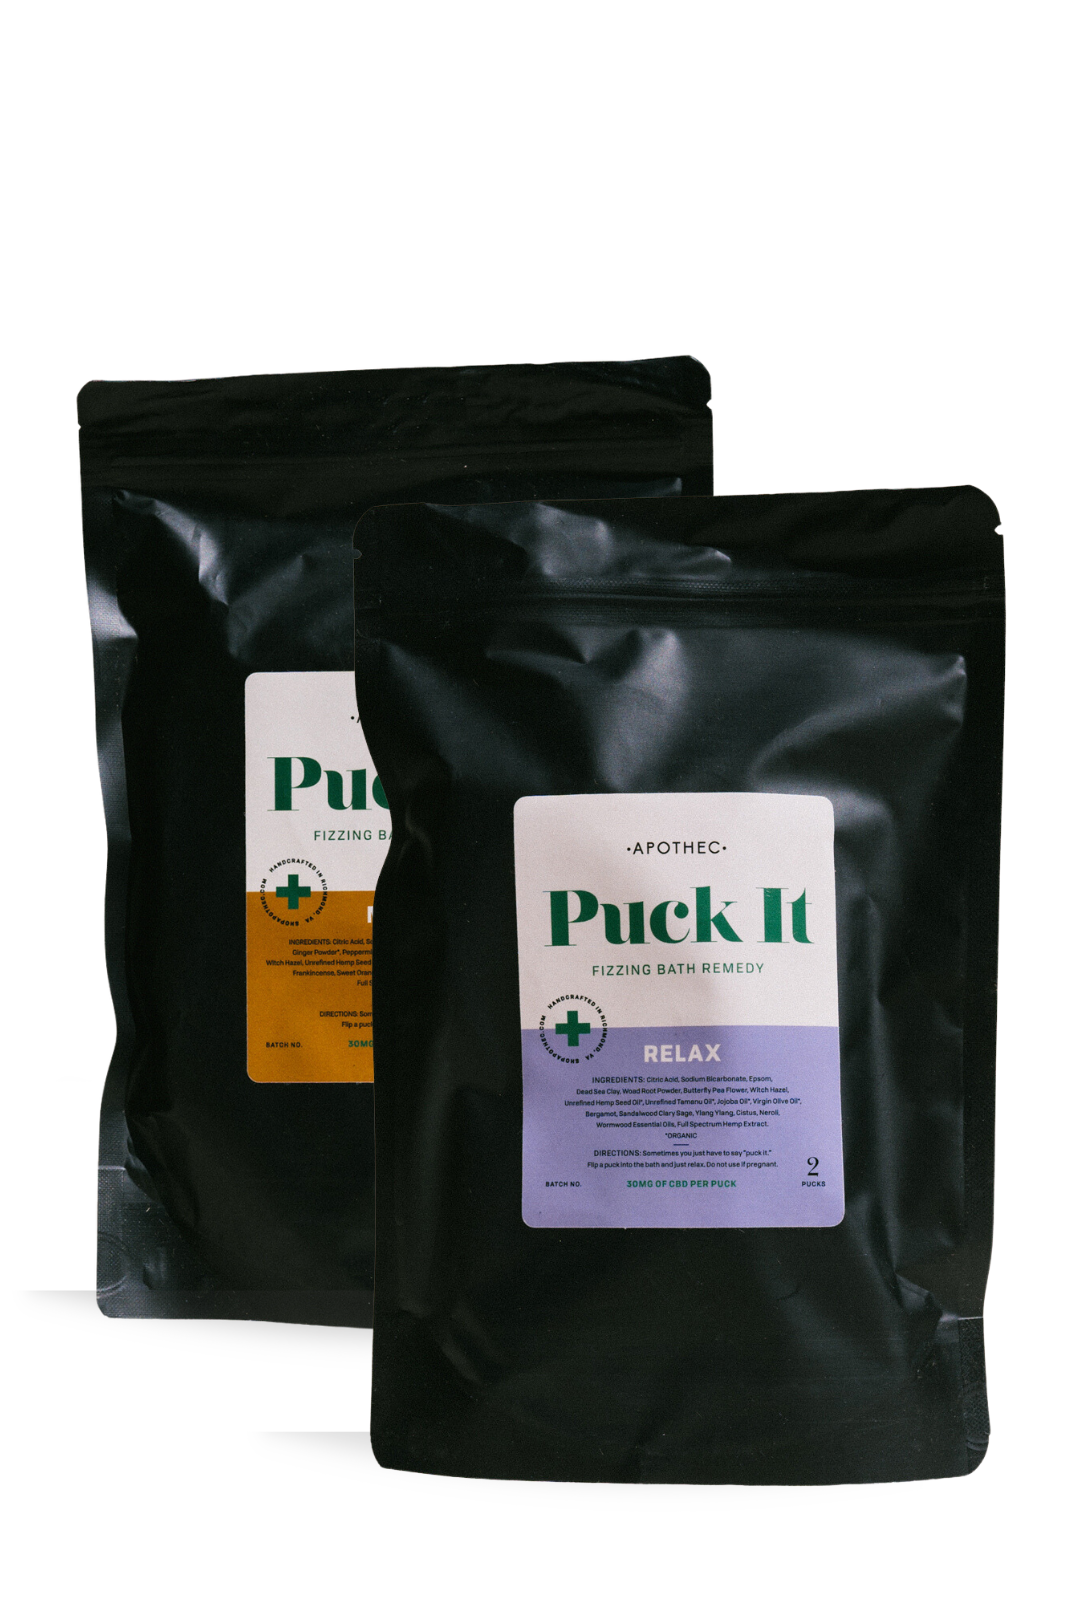 Puck It - Fizzing Bath Remedy by Apothec